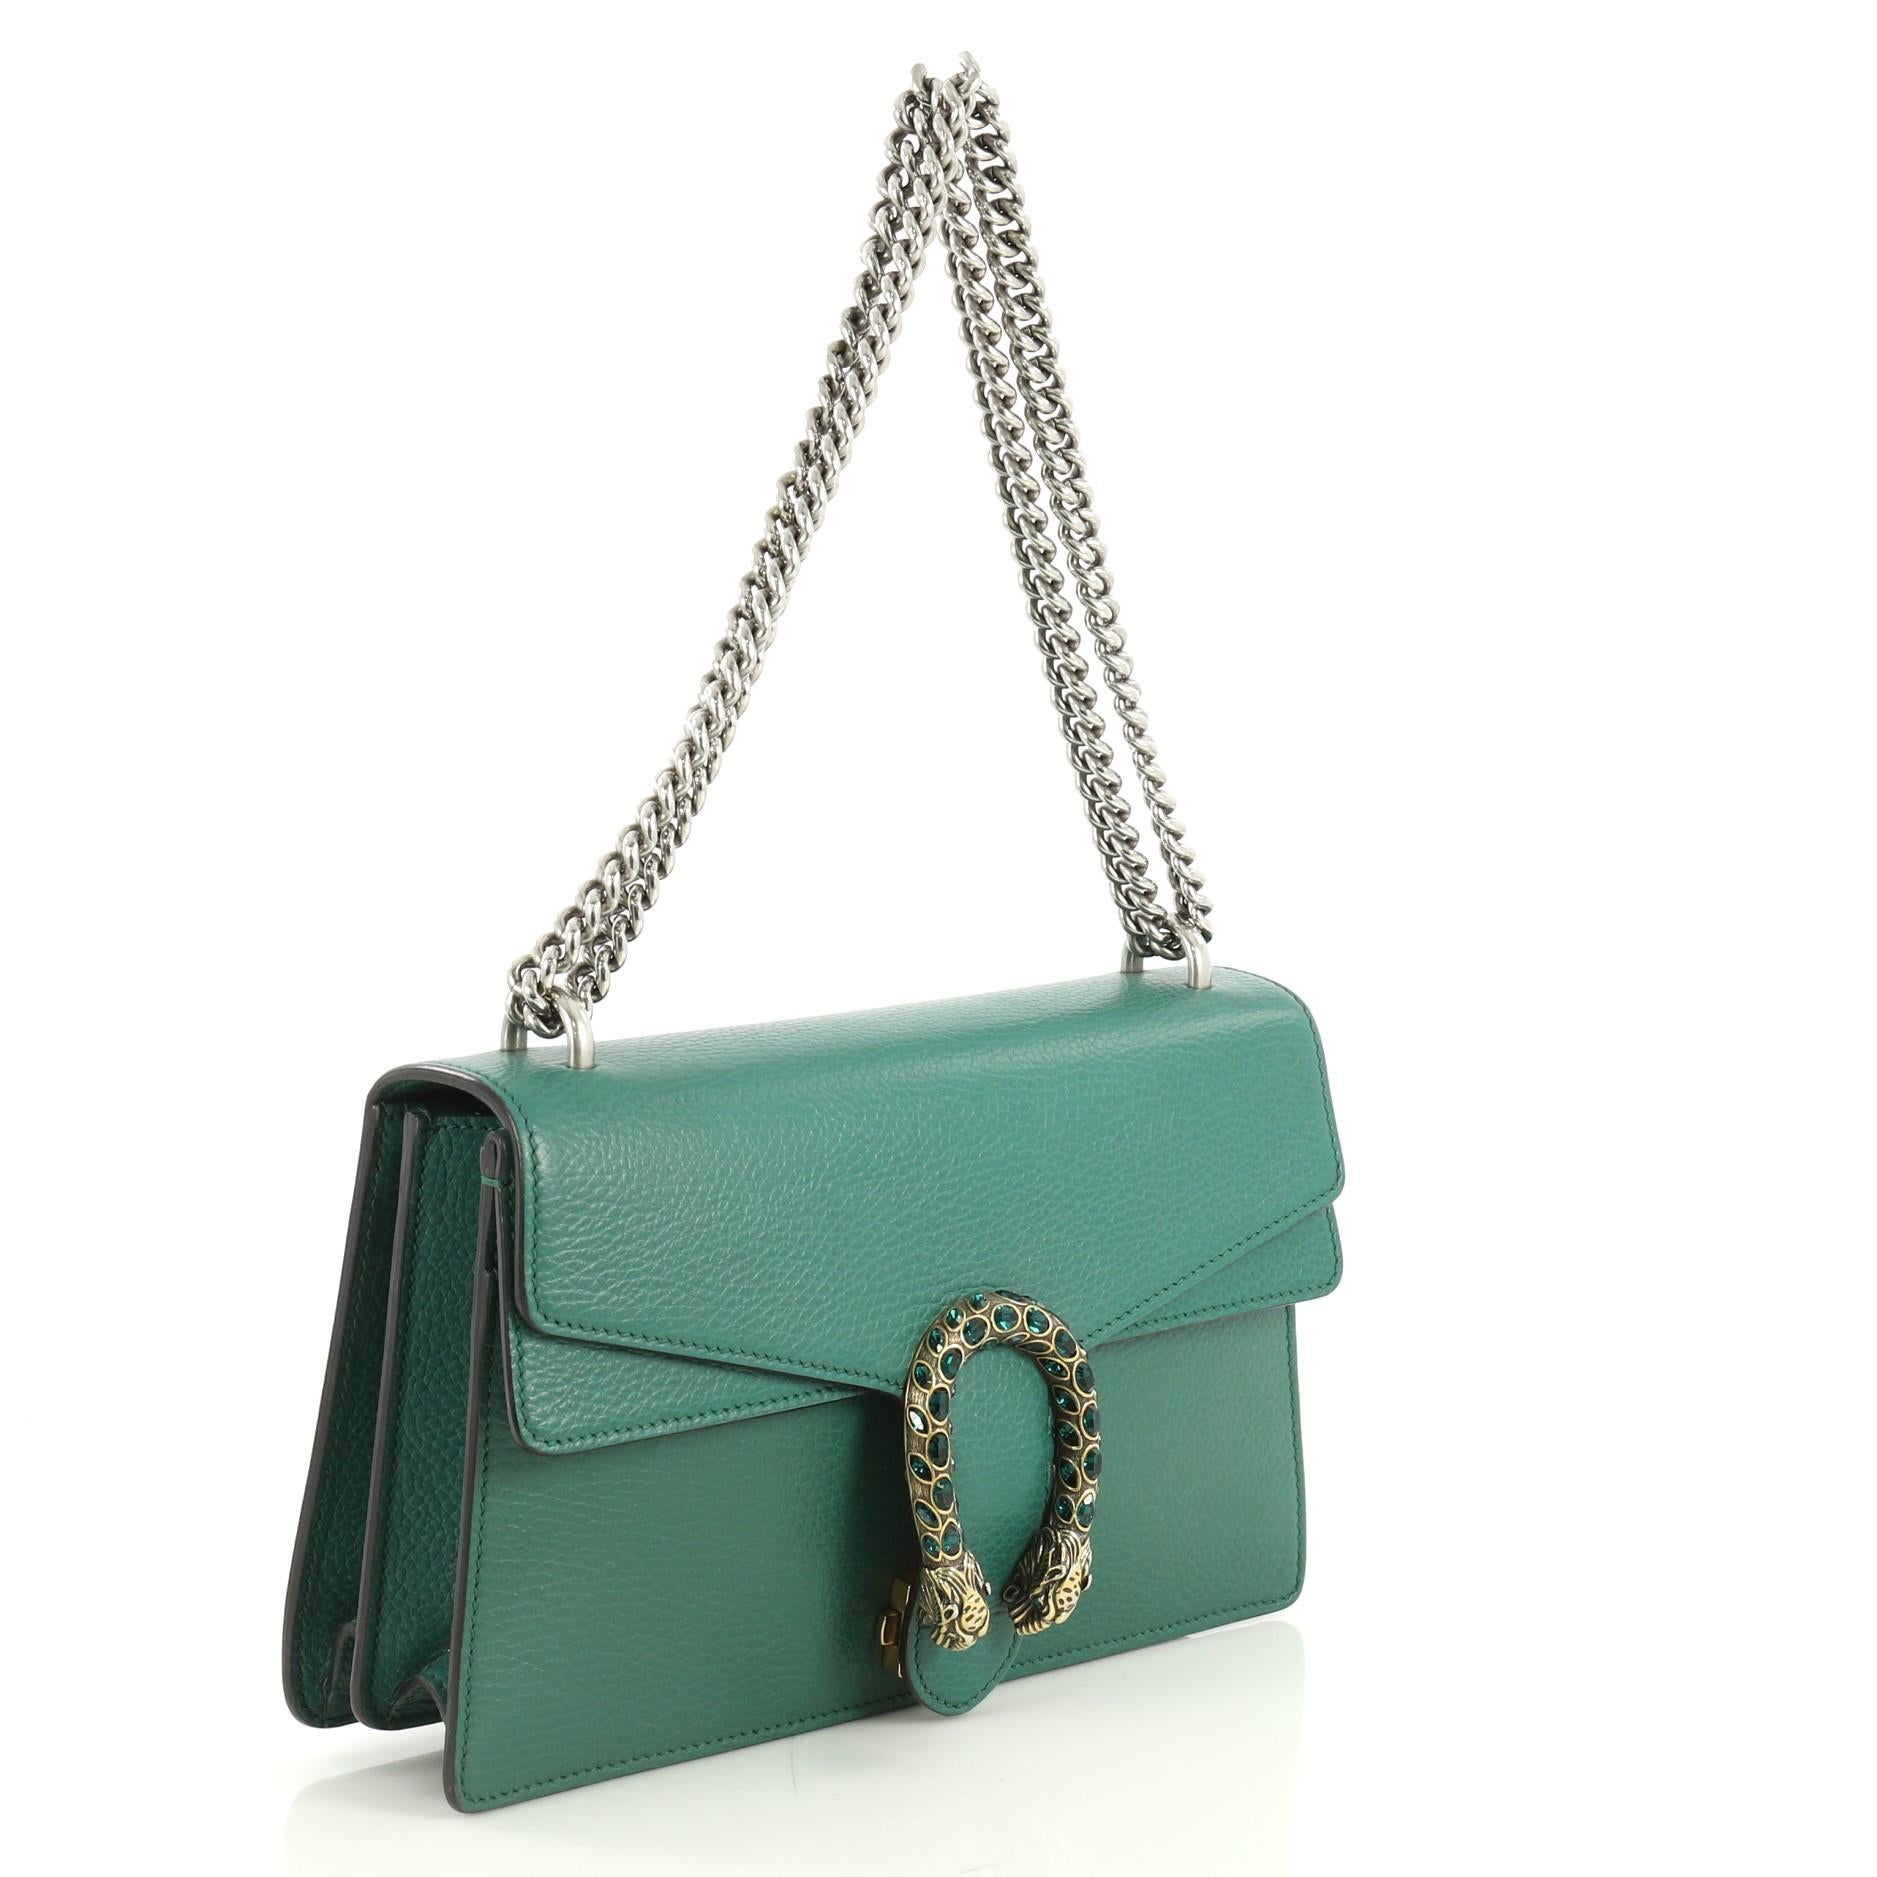 This Gucci Dionysus Bag Leather Small, crafted from green leather, features a chain link strap, embellished tiger head spur detail on its flap, accordion-like gusseted sides, and aged silver and aged gold-tone hardware. Its hidden push-pin closure